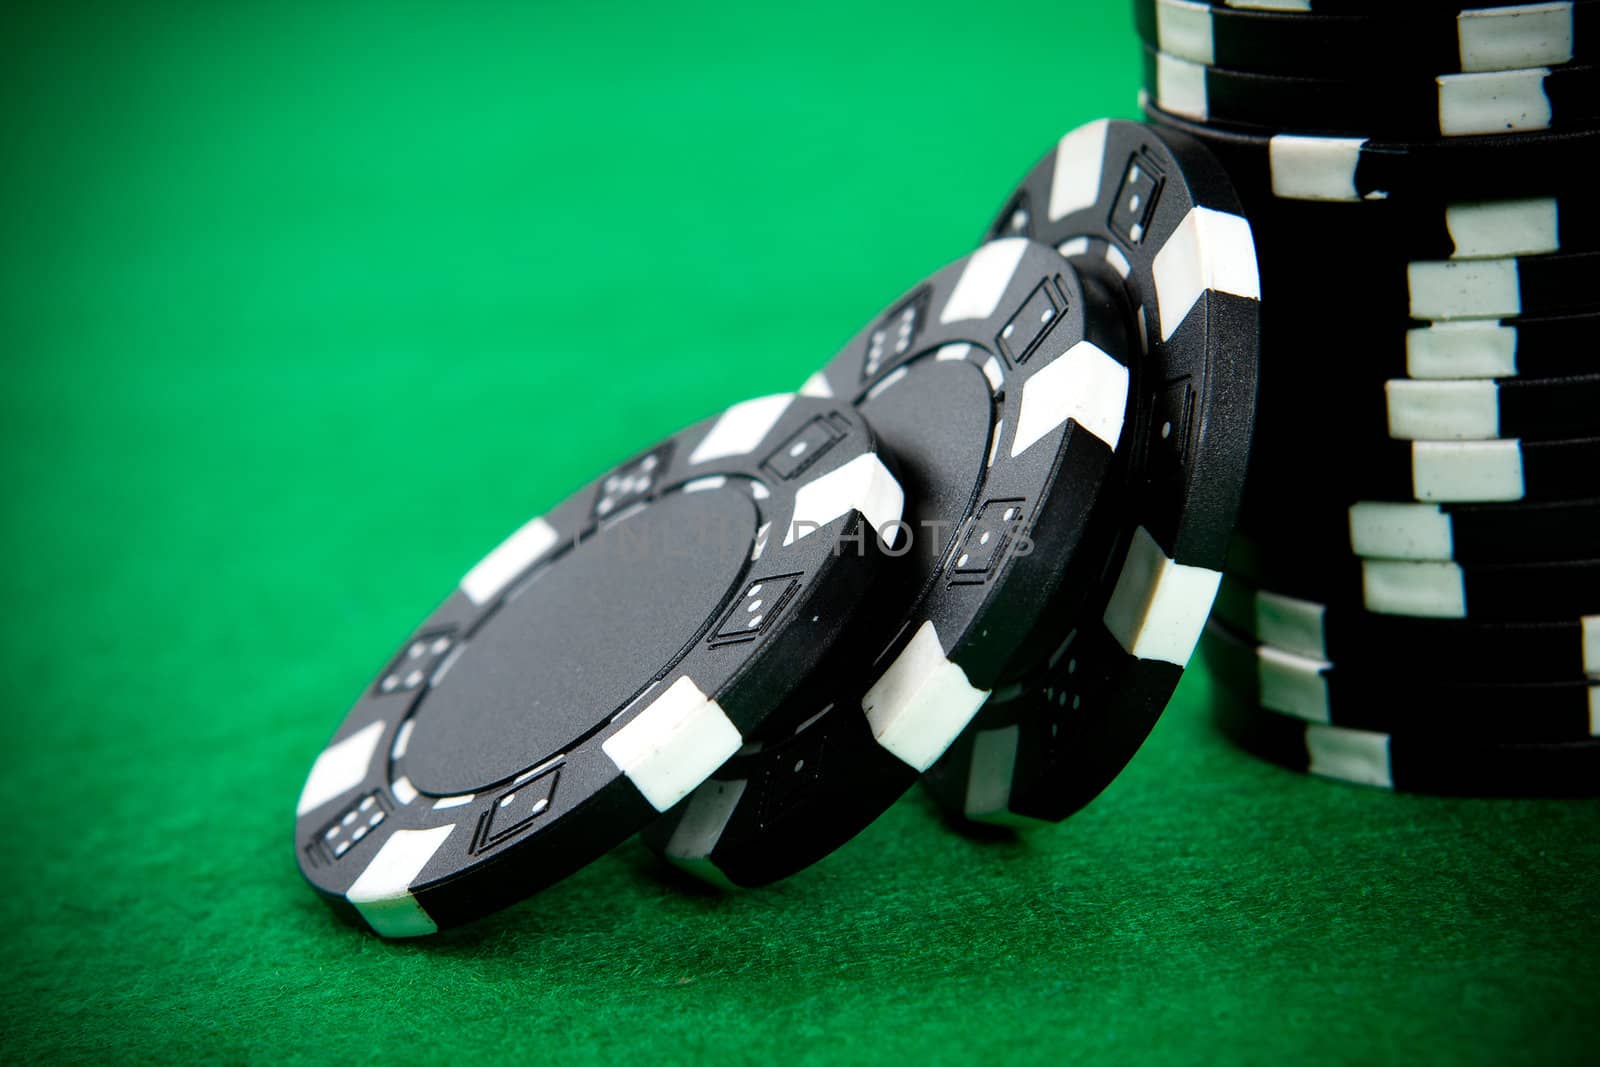 Stack of black poker chips by rachwal